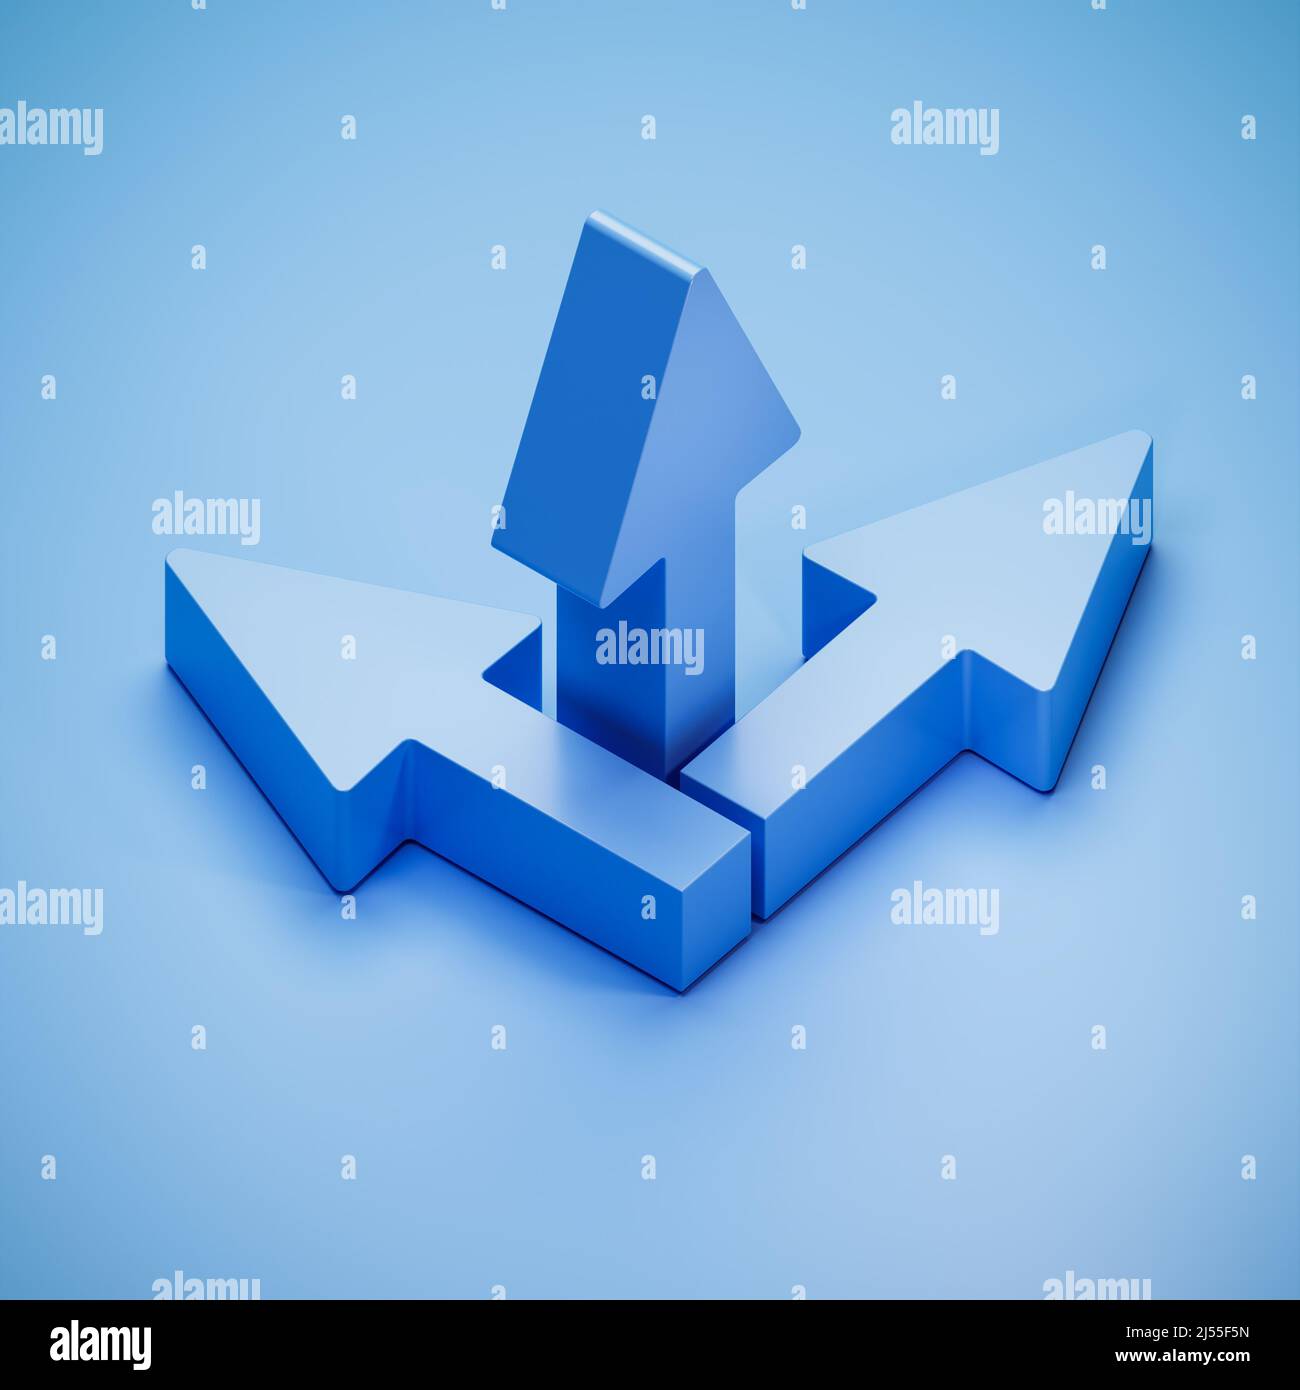 Blue arrows pointing into three different directions. Confusion, direction, irritation concept. Stock Photo